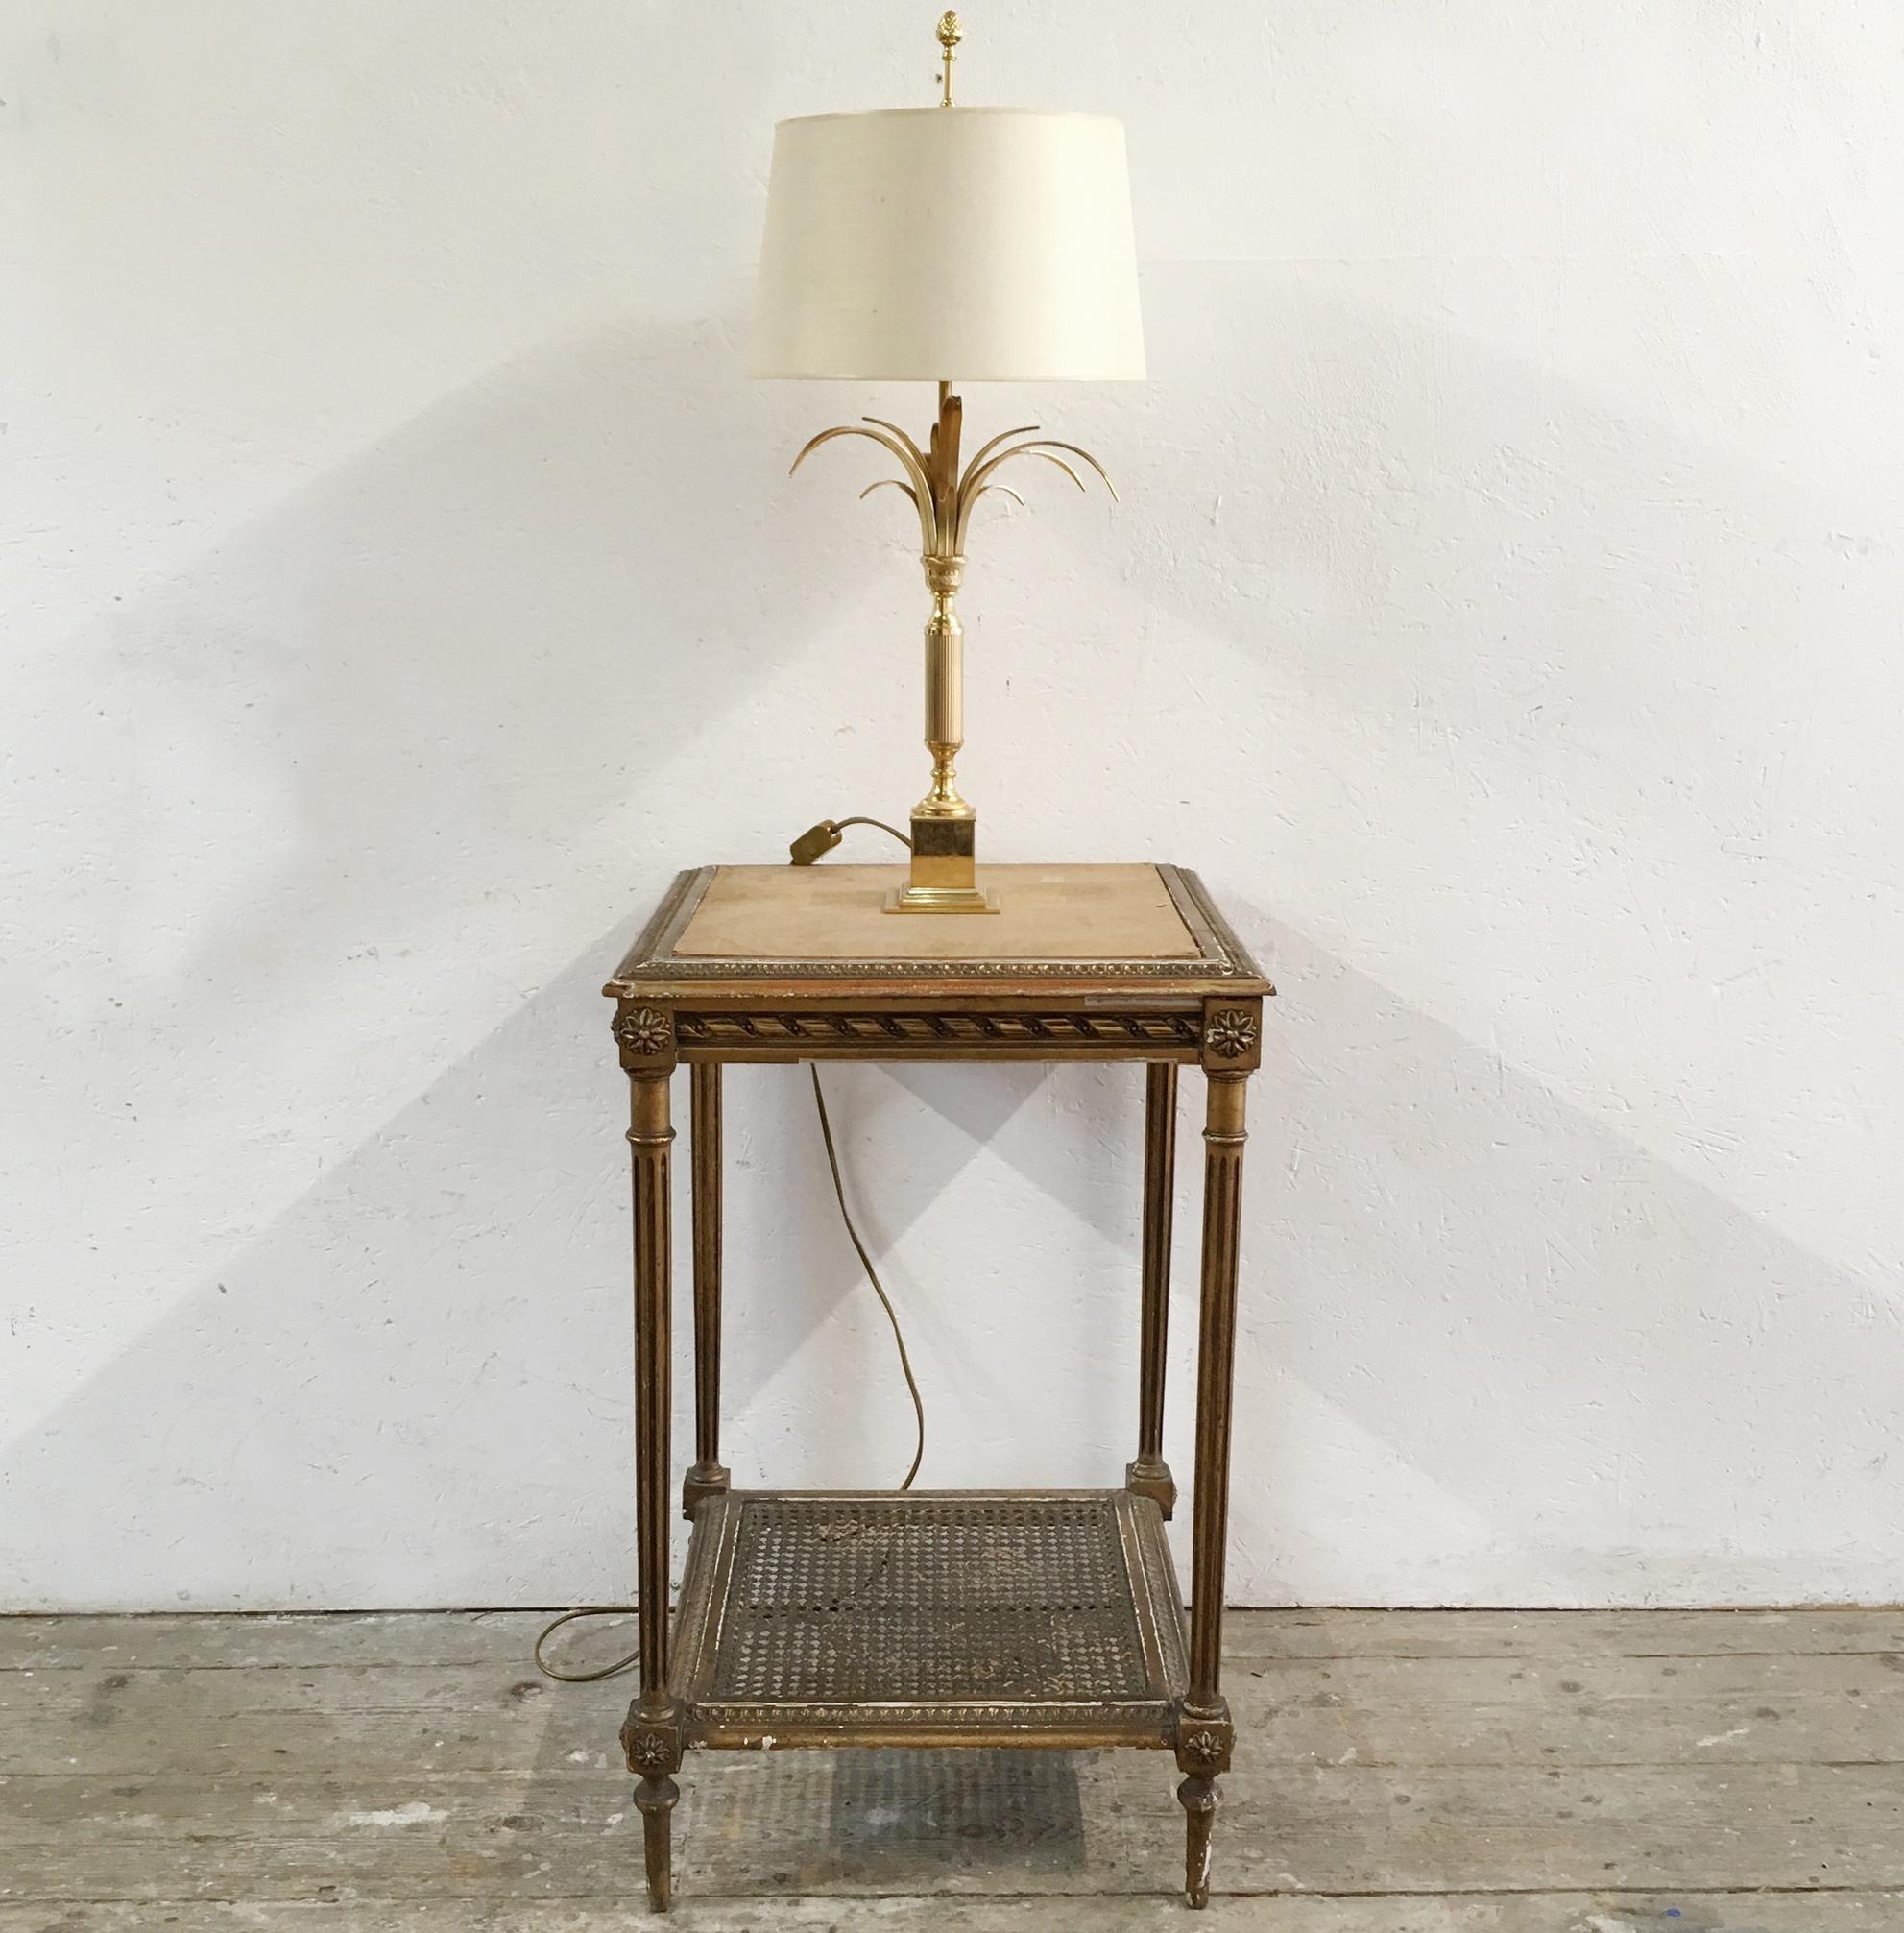 20th Century S A Boulanger Pineapple Table Lamp